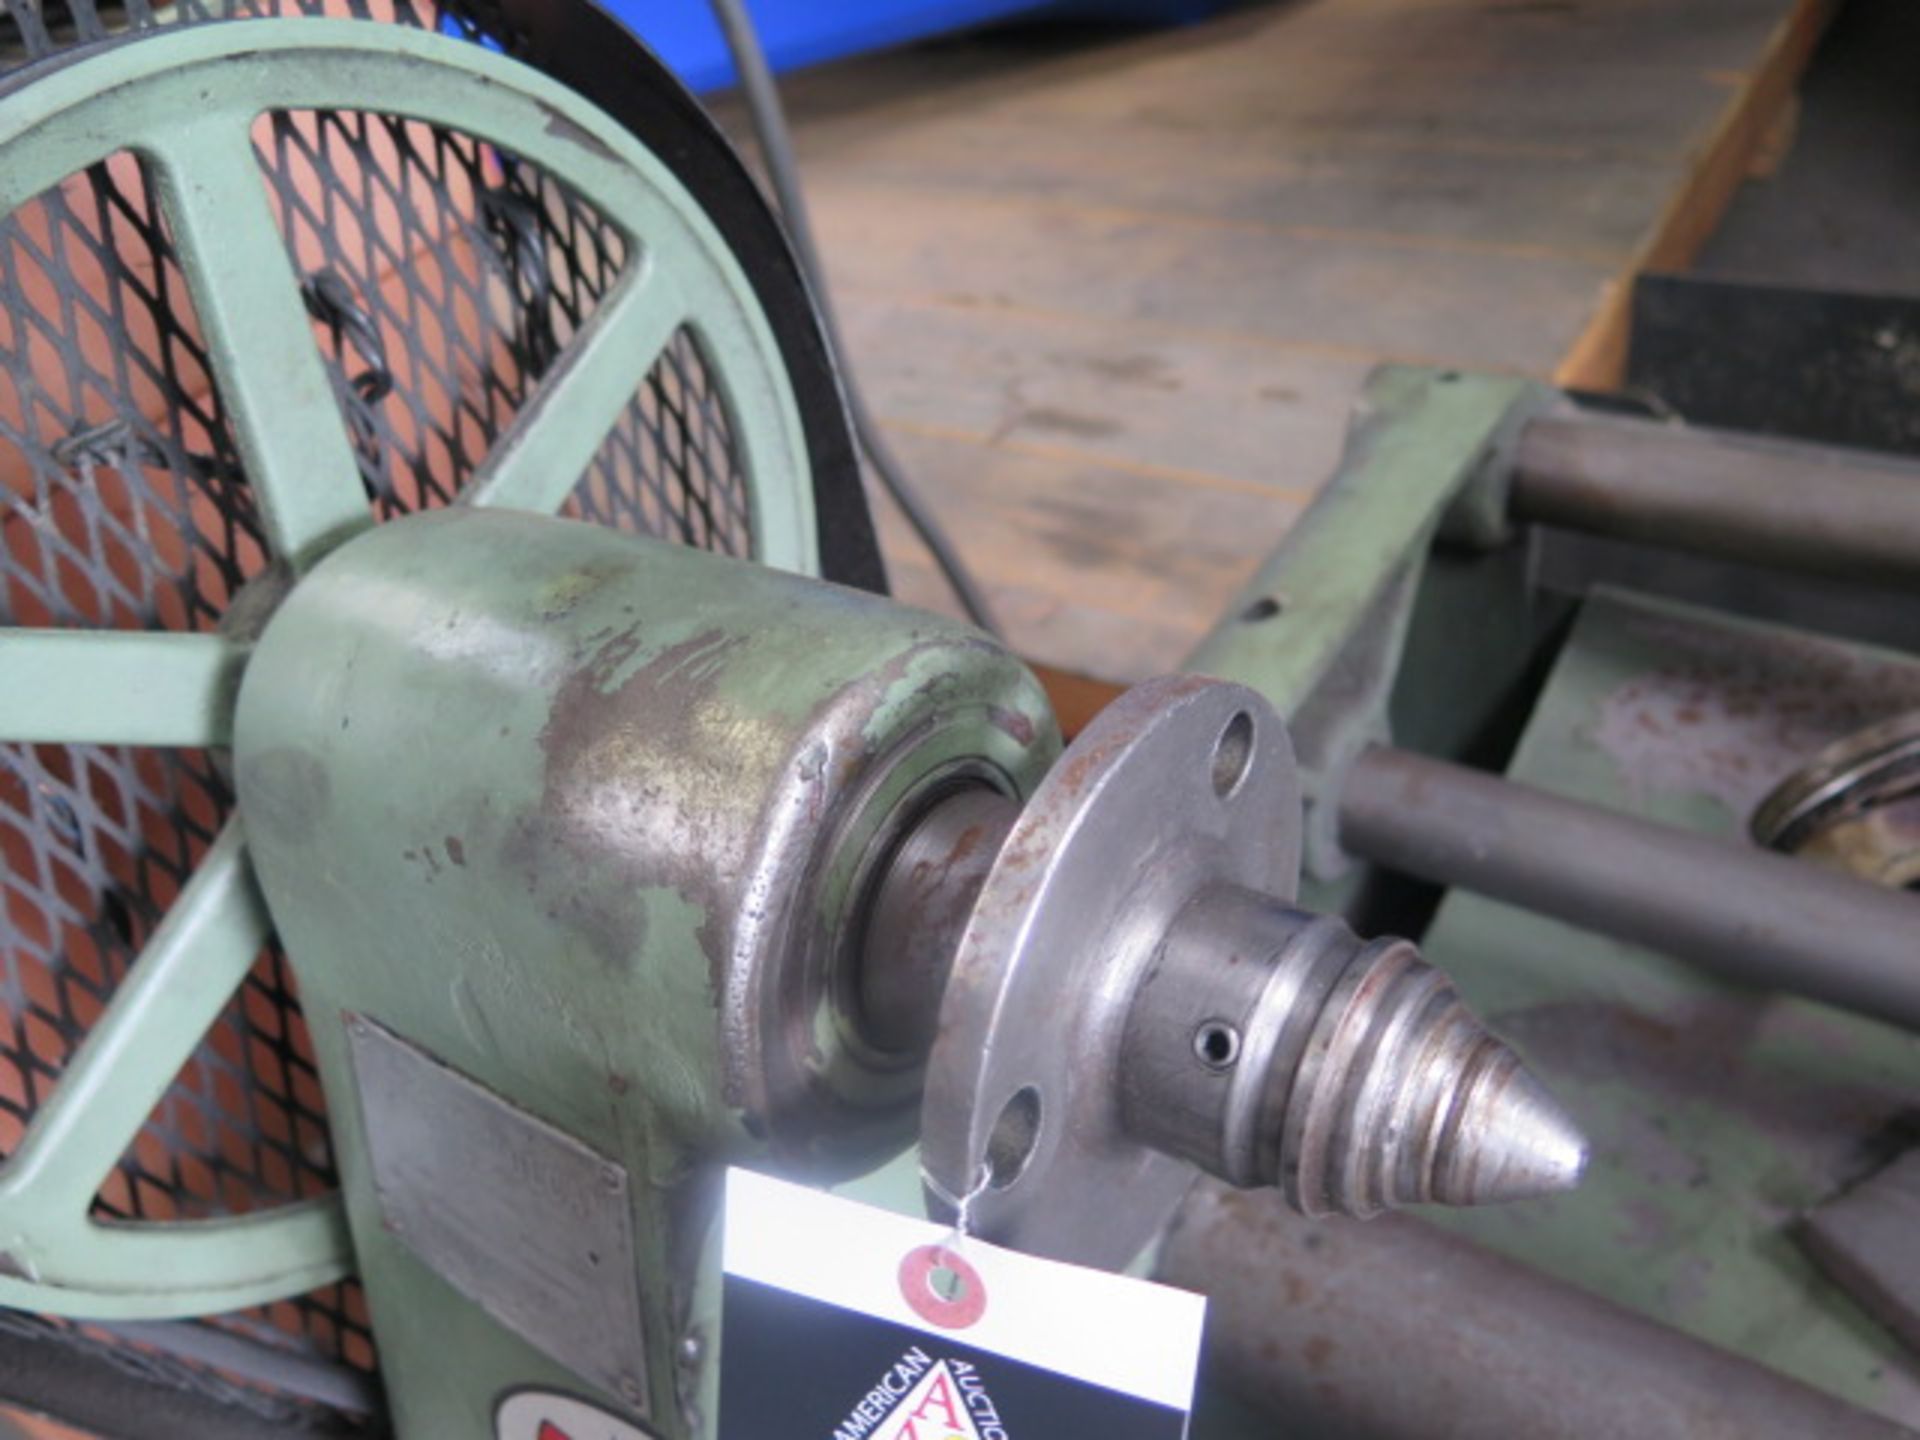 Storm-Vulcan mdl. 135 Crank Shaft Finishing Machine s/n 50-187 (SOLD AS-IS - NO WARRANTY) - Image 7 of 11